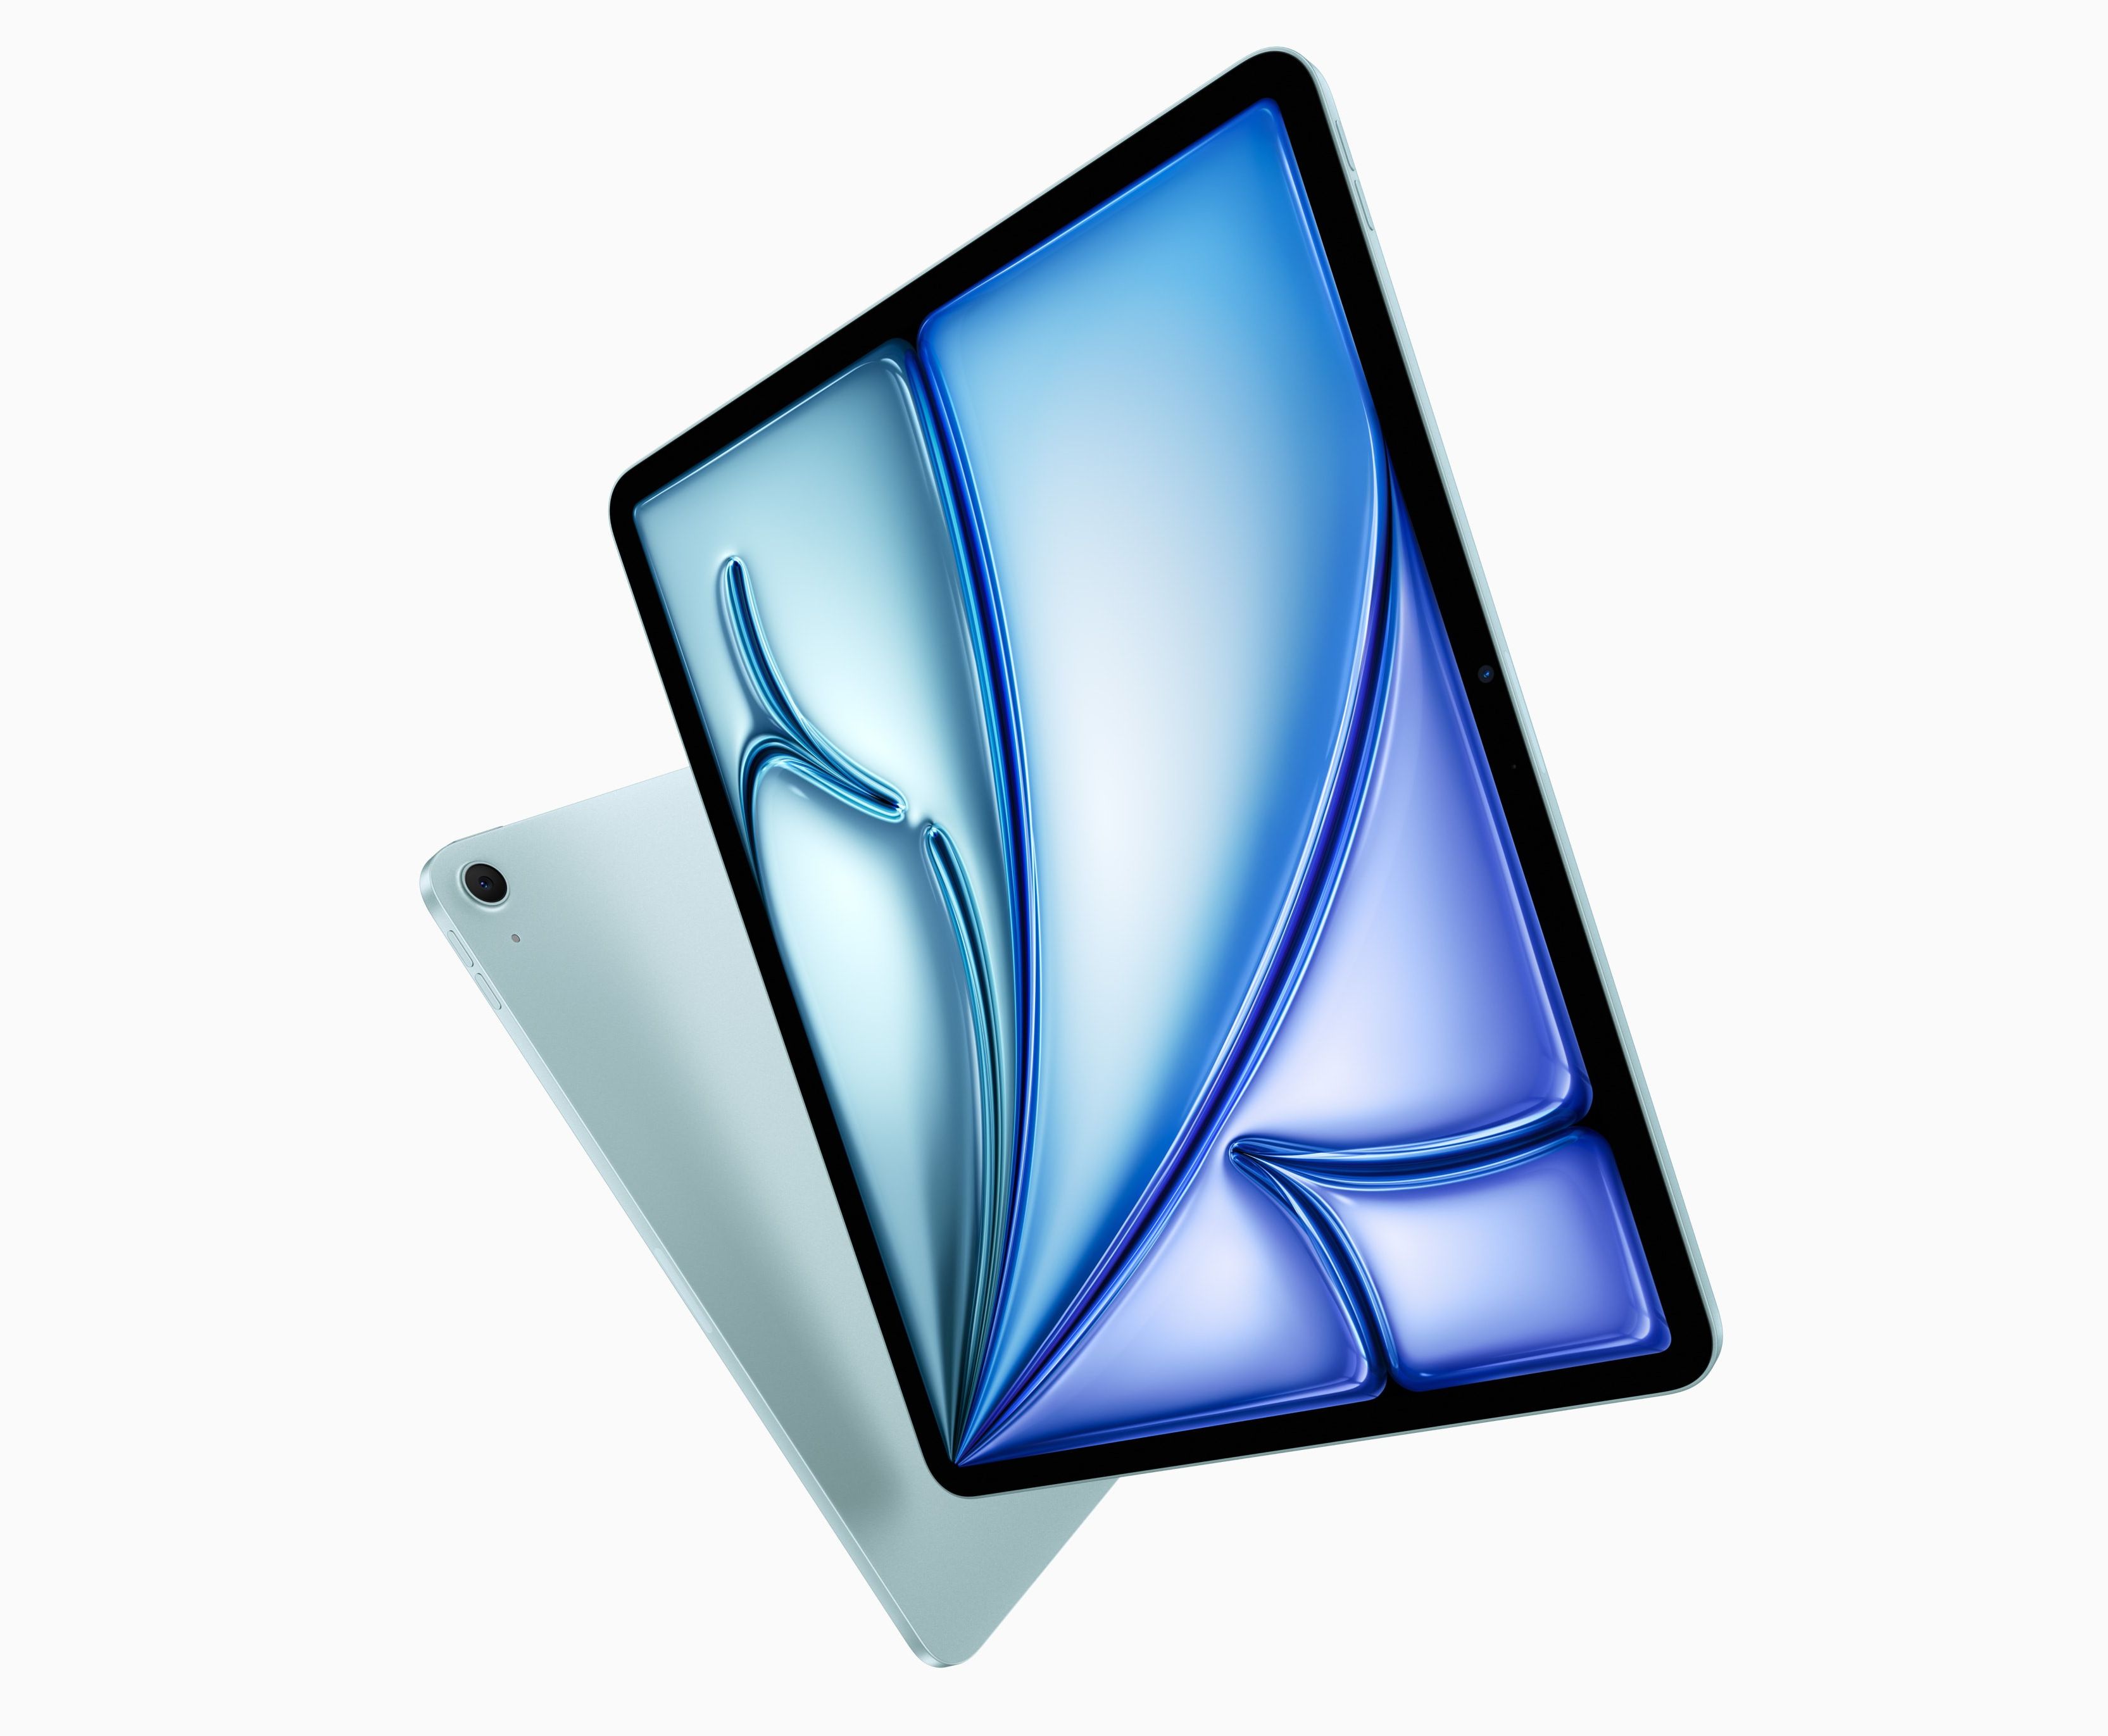 ipad air pictured in blue in two sizes